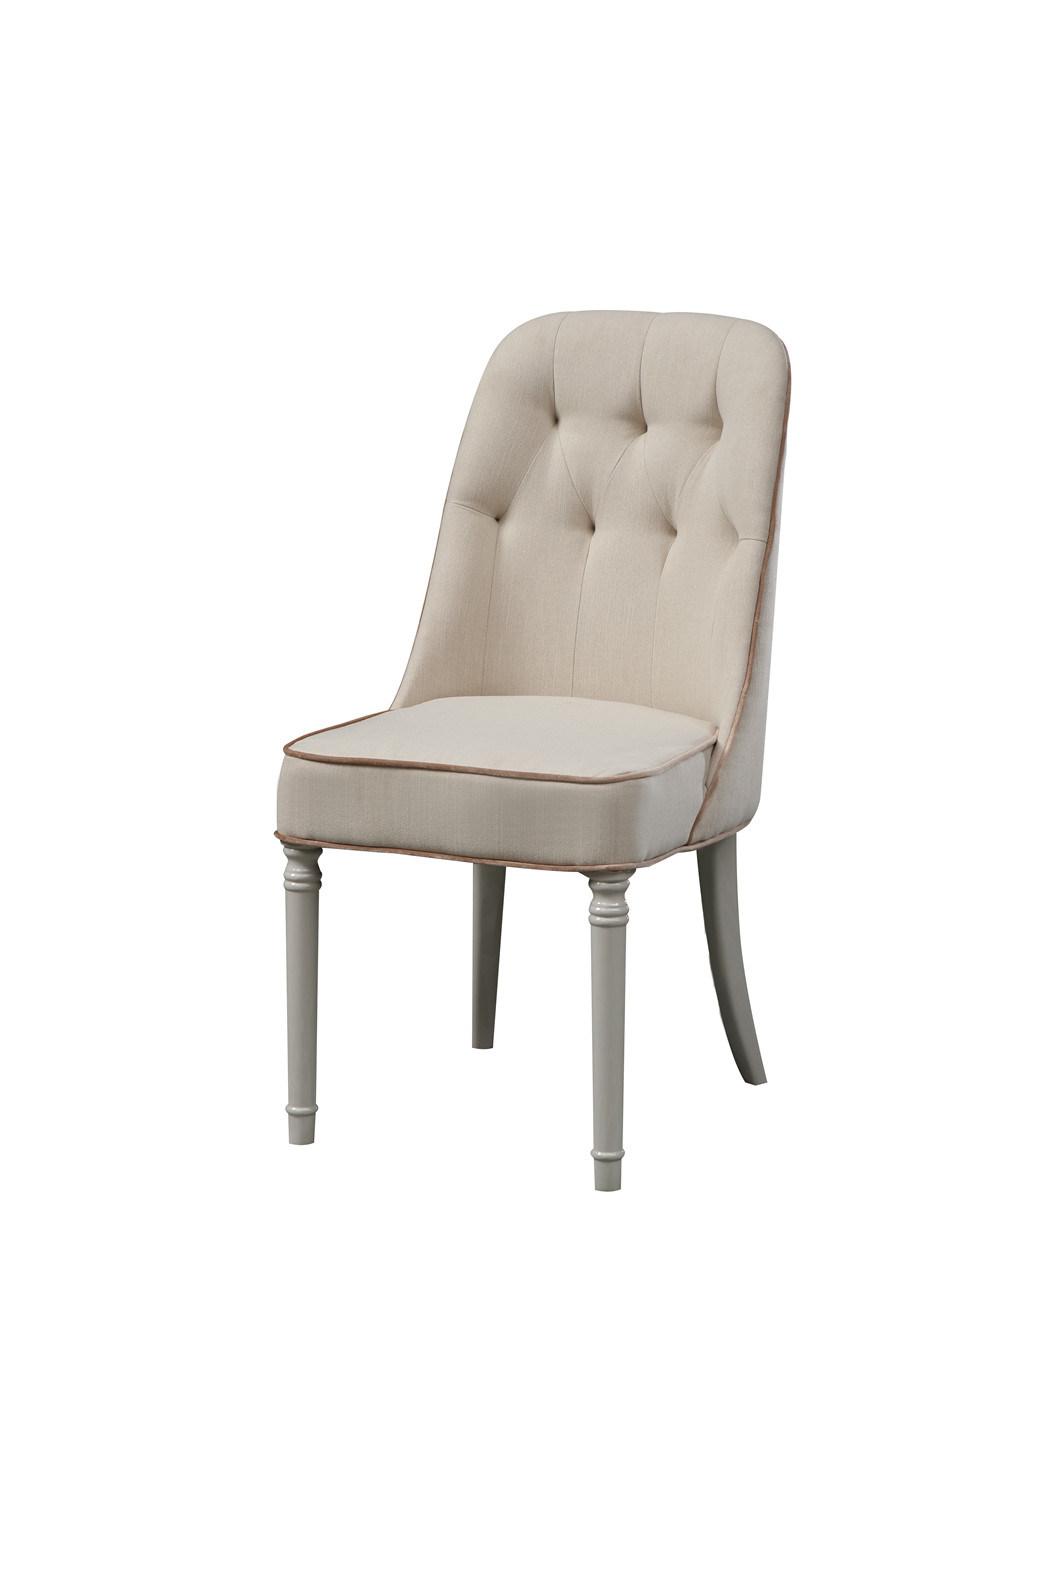 Solid Wood Leisure Dining Gold Chair